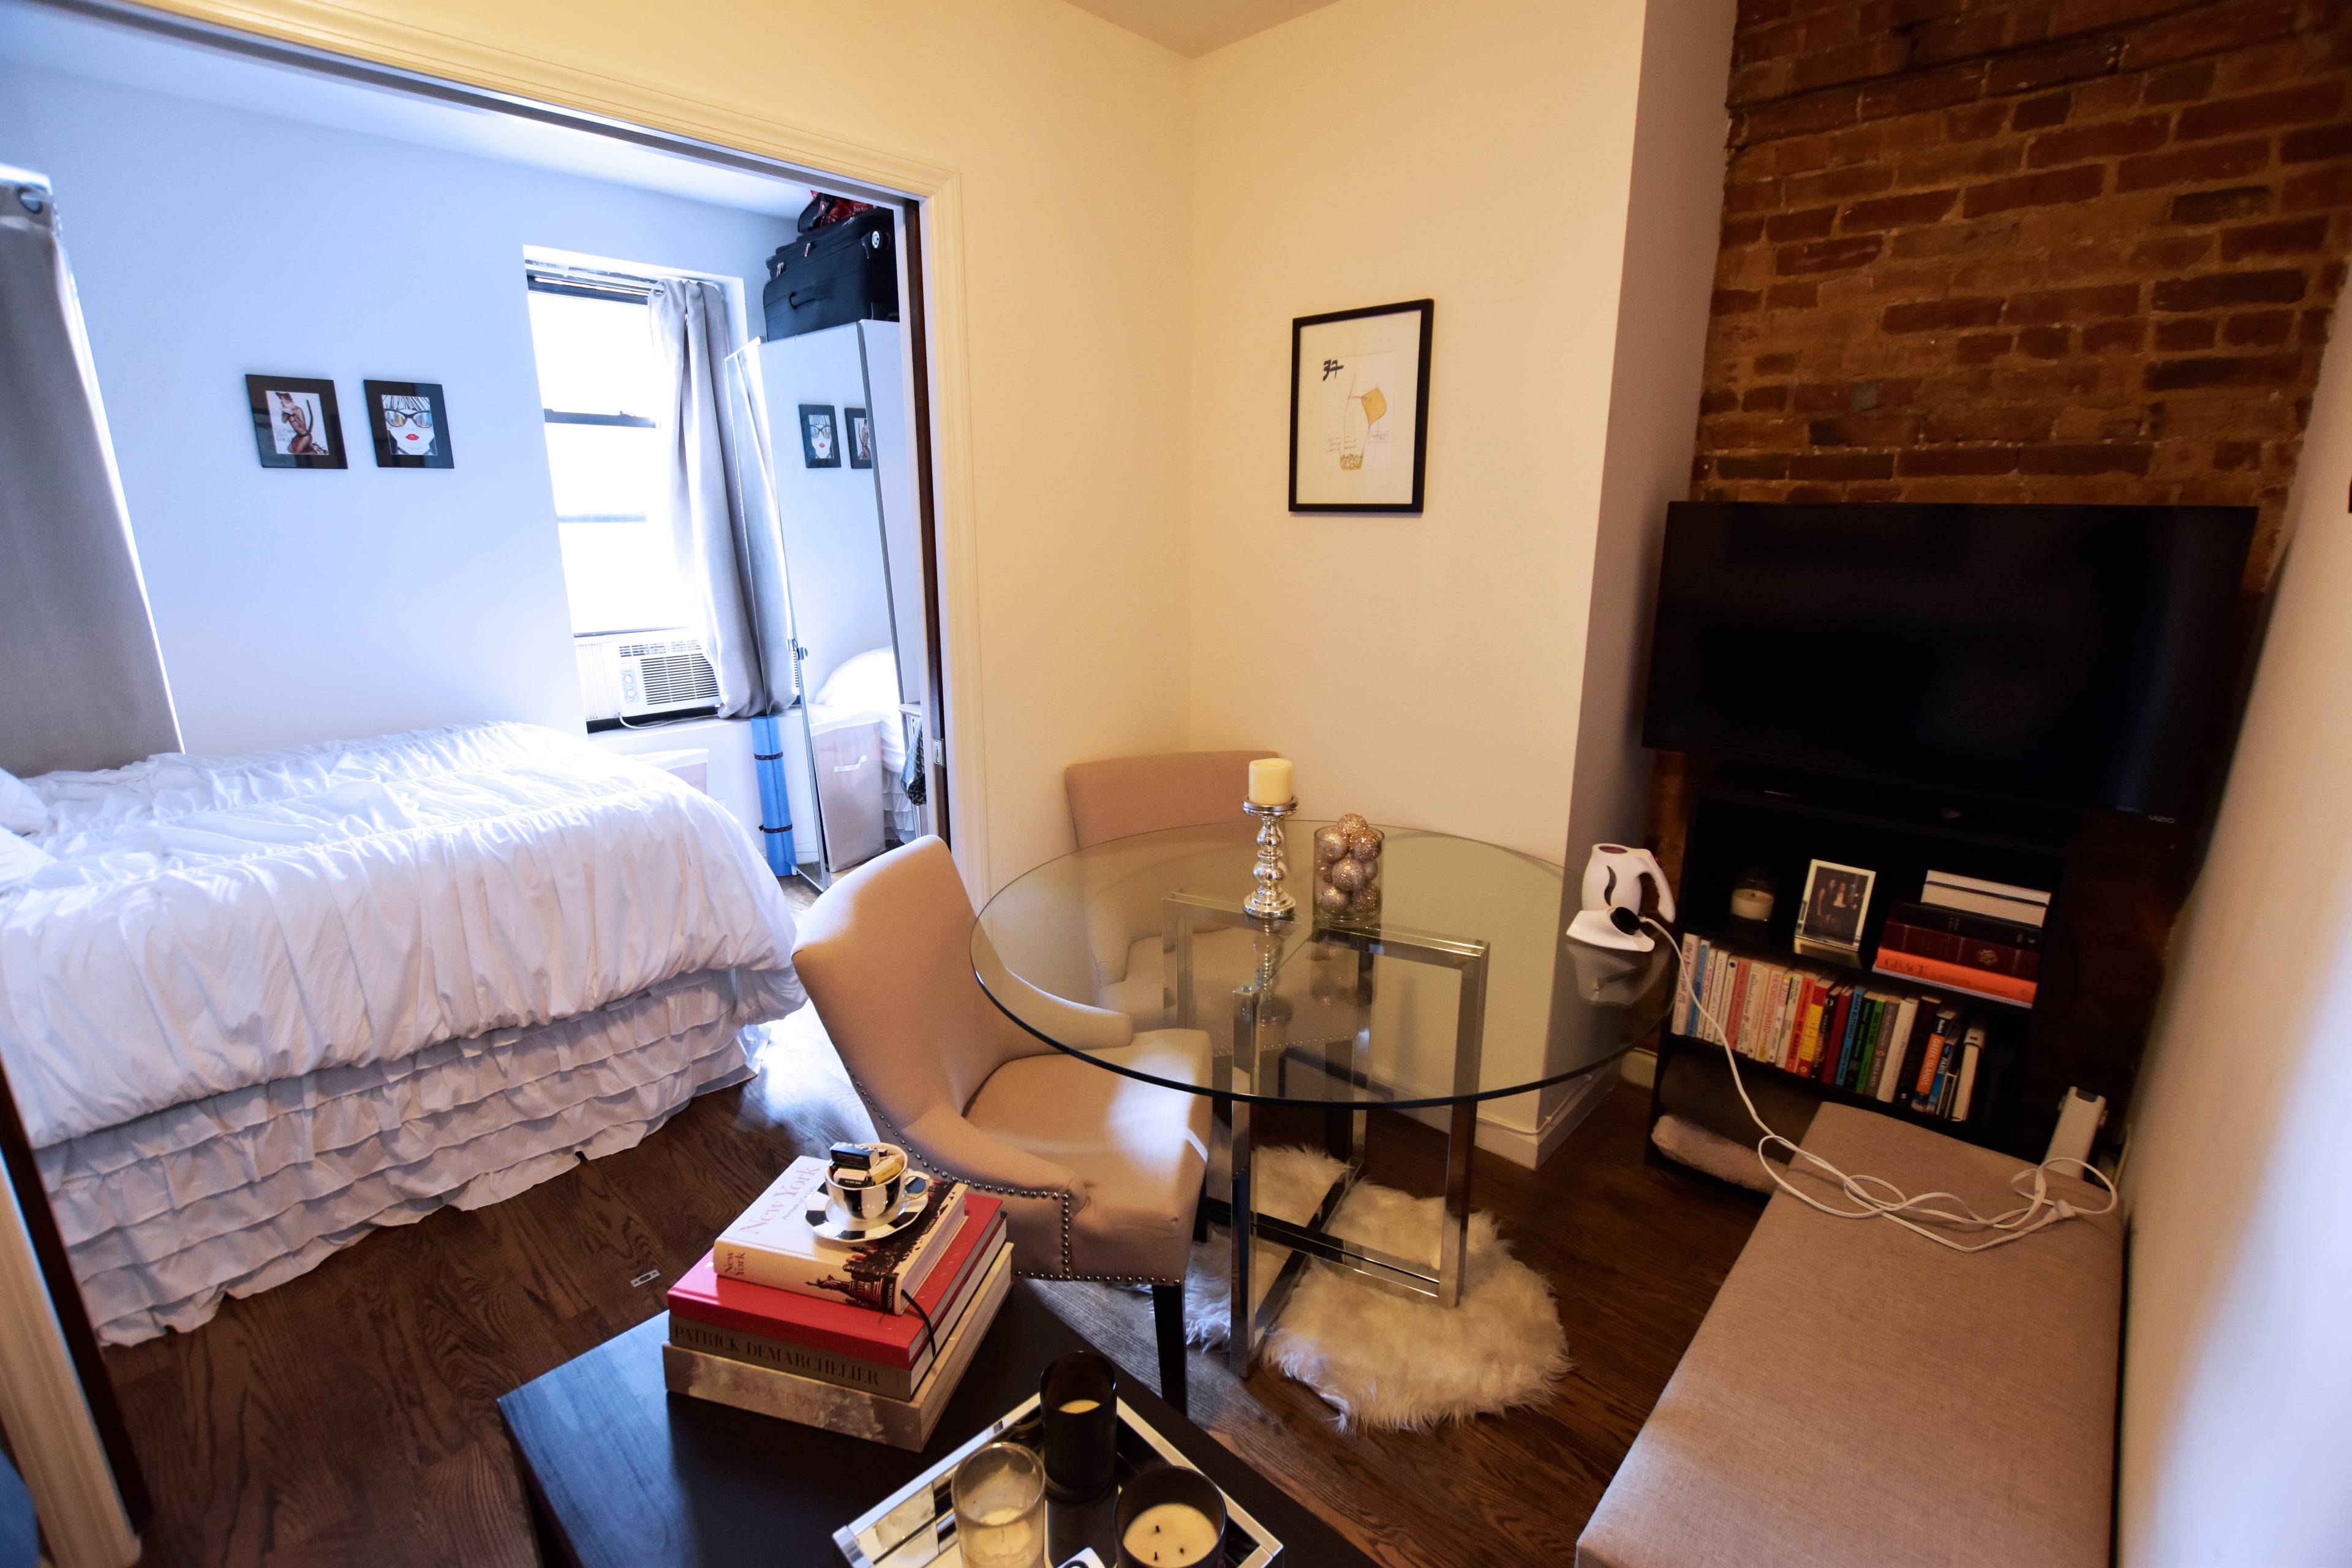 2 bedroom apartment in the HEART of the Lower East Side.